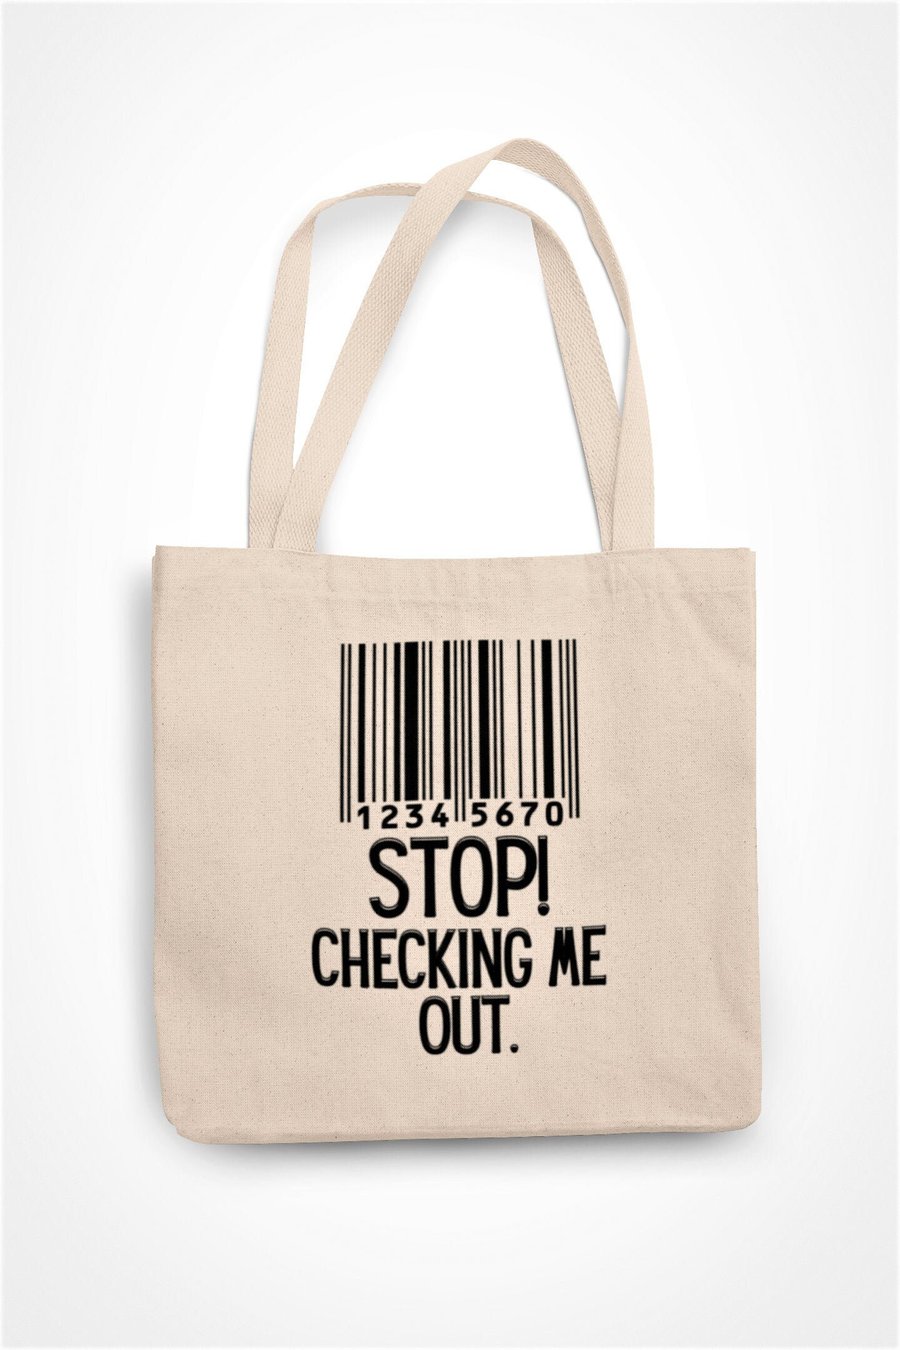 Stop Checking Me Out Tote Bag Funny Novelty Gift Joke Present For Family Friend 